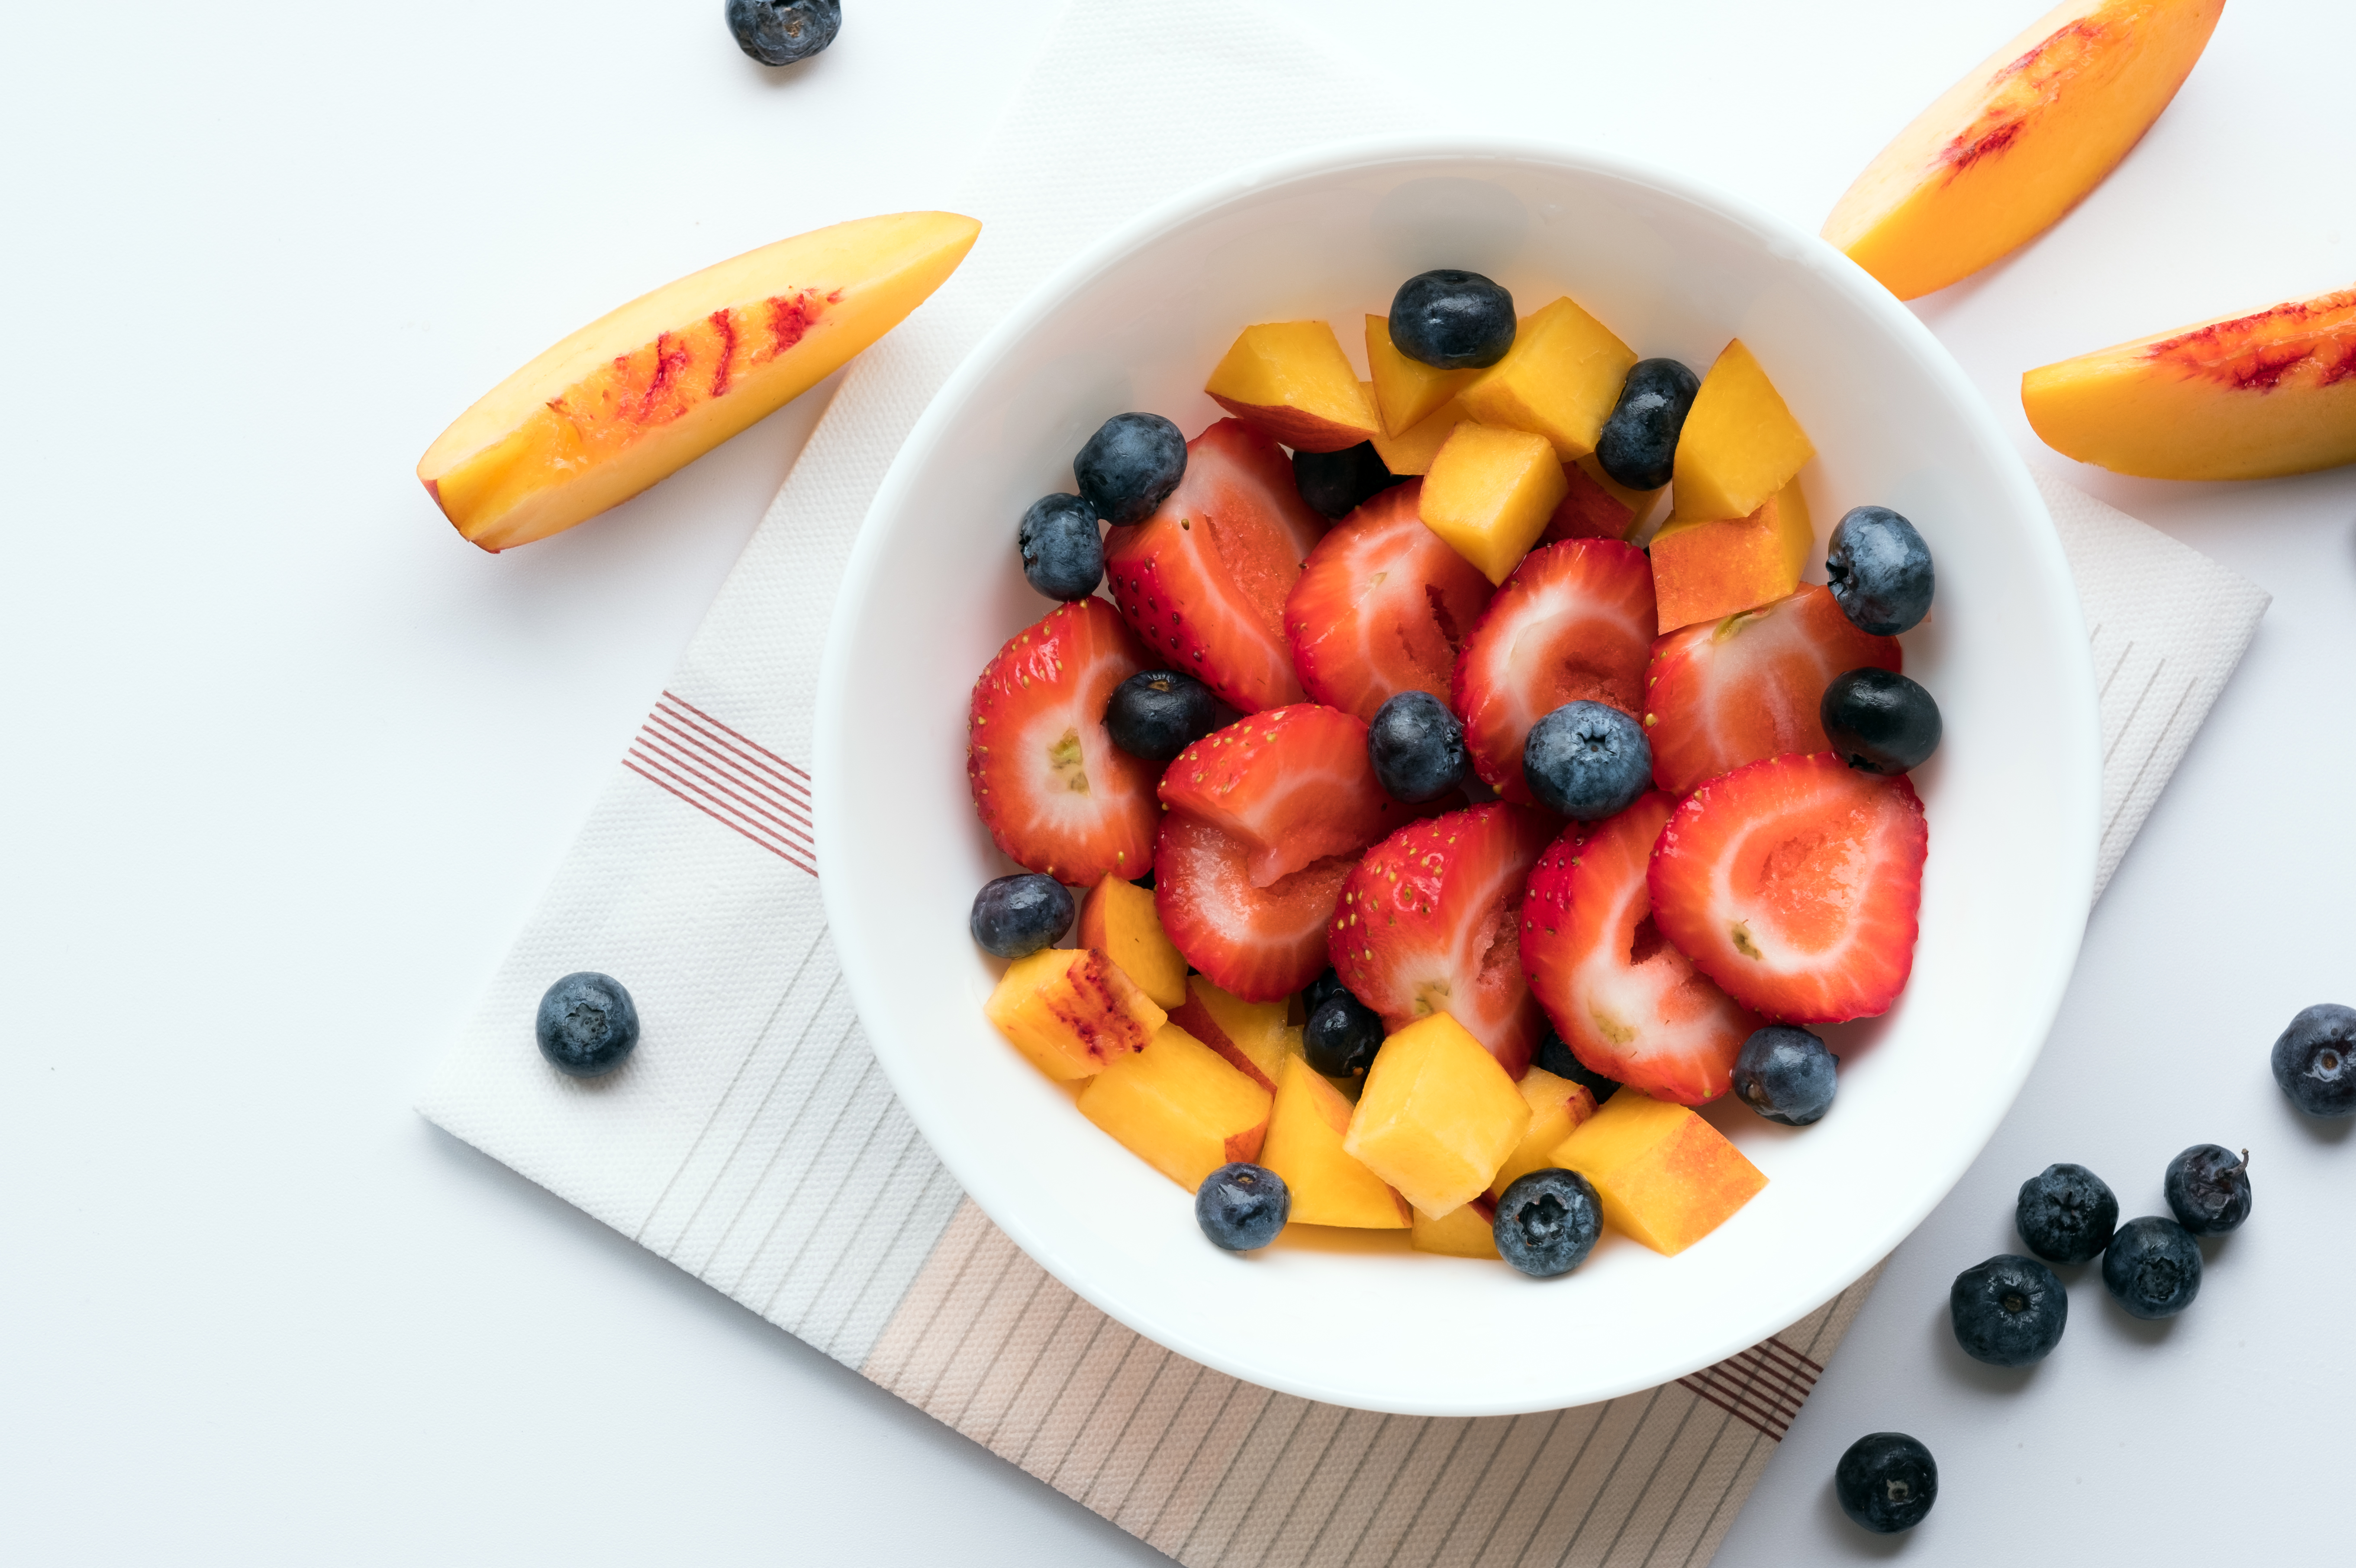 Eating fresh fruits daily may reduce your risk of cardiovascular death